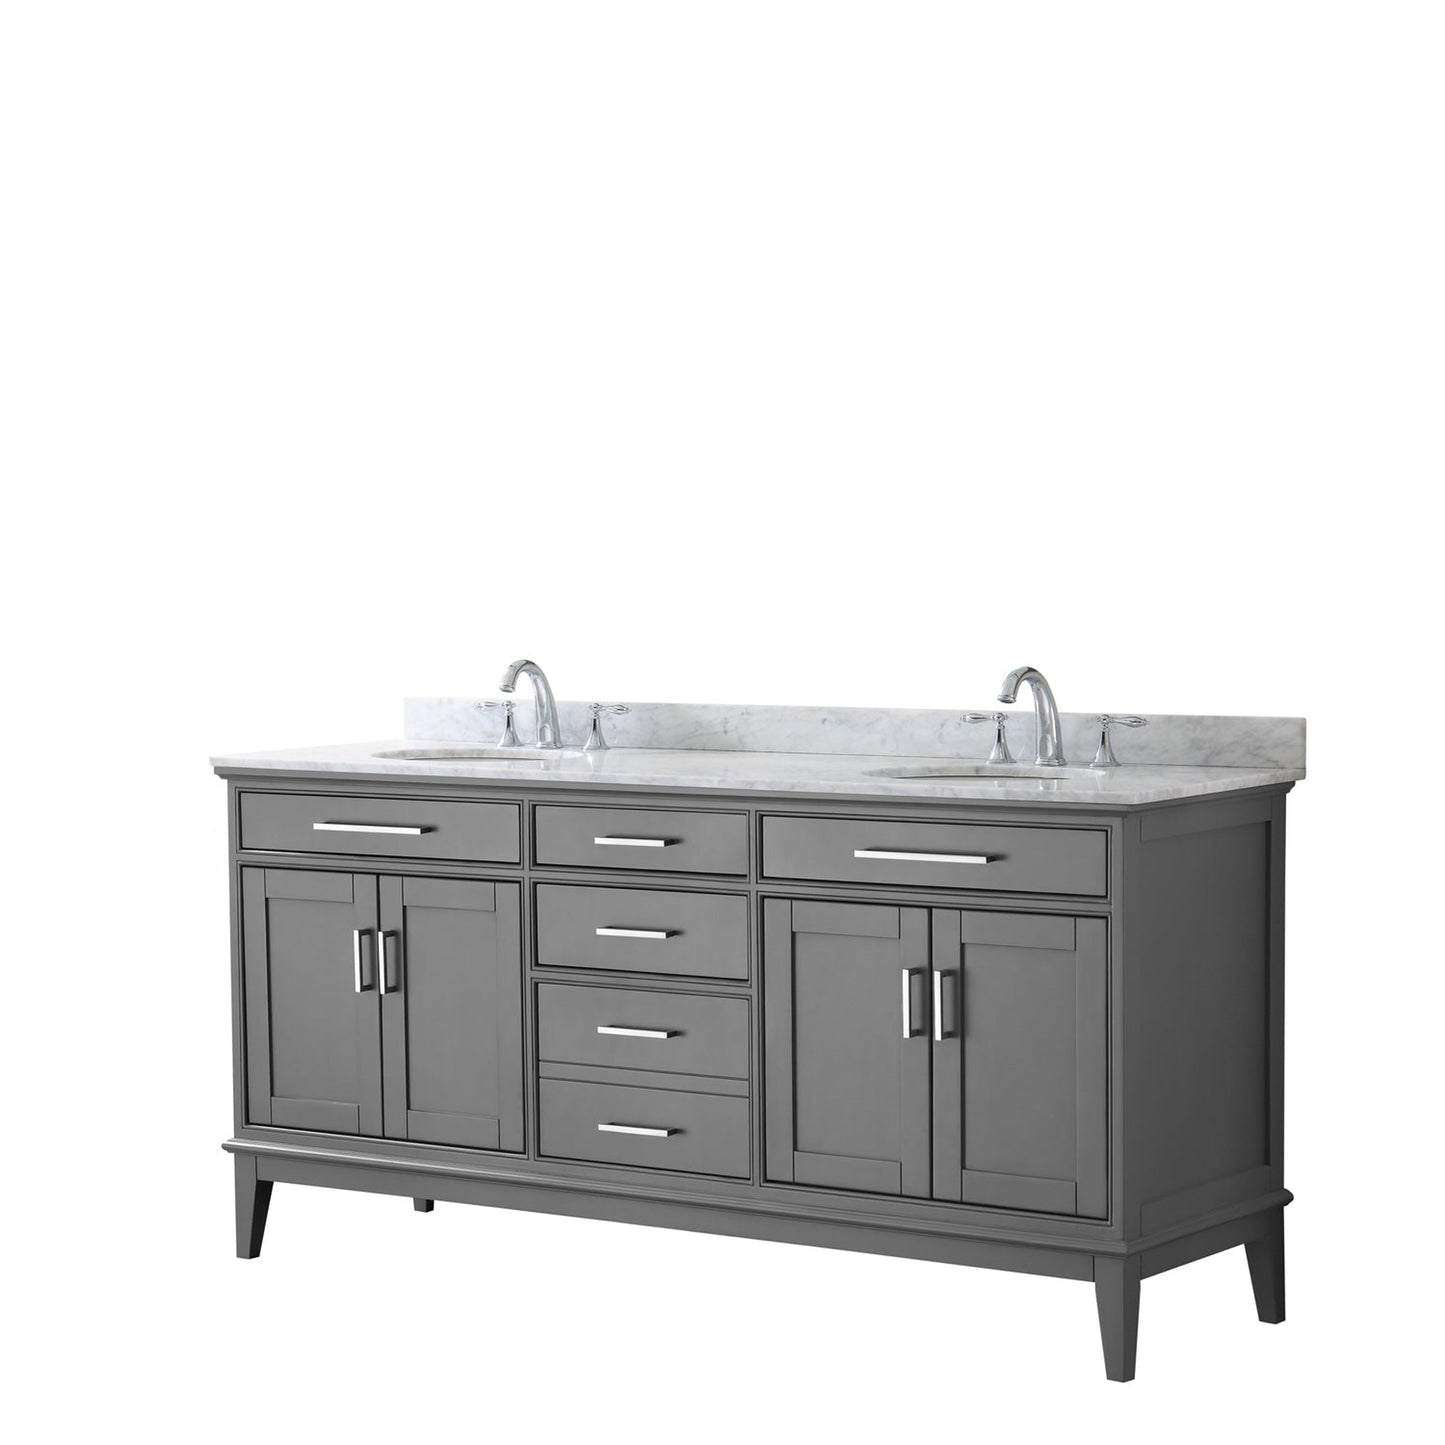 Wyndham Collection Margate 72" Double Bathroom Dark Gray Vanity With White Carrara Marble Countertop And Undermount Oval Sink